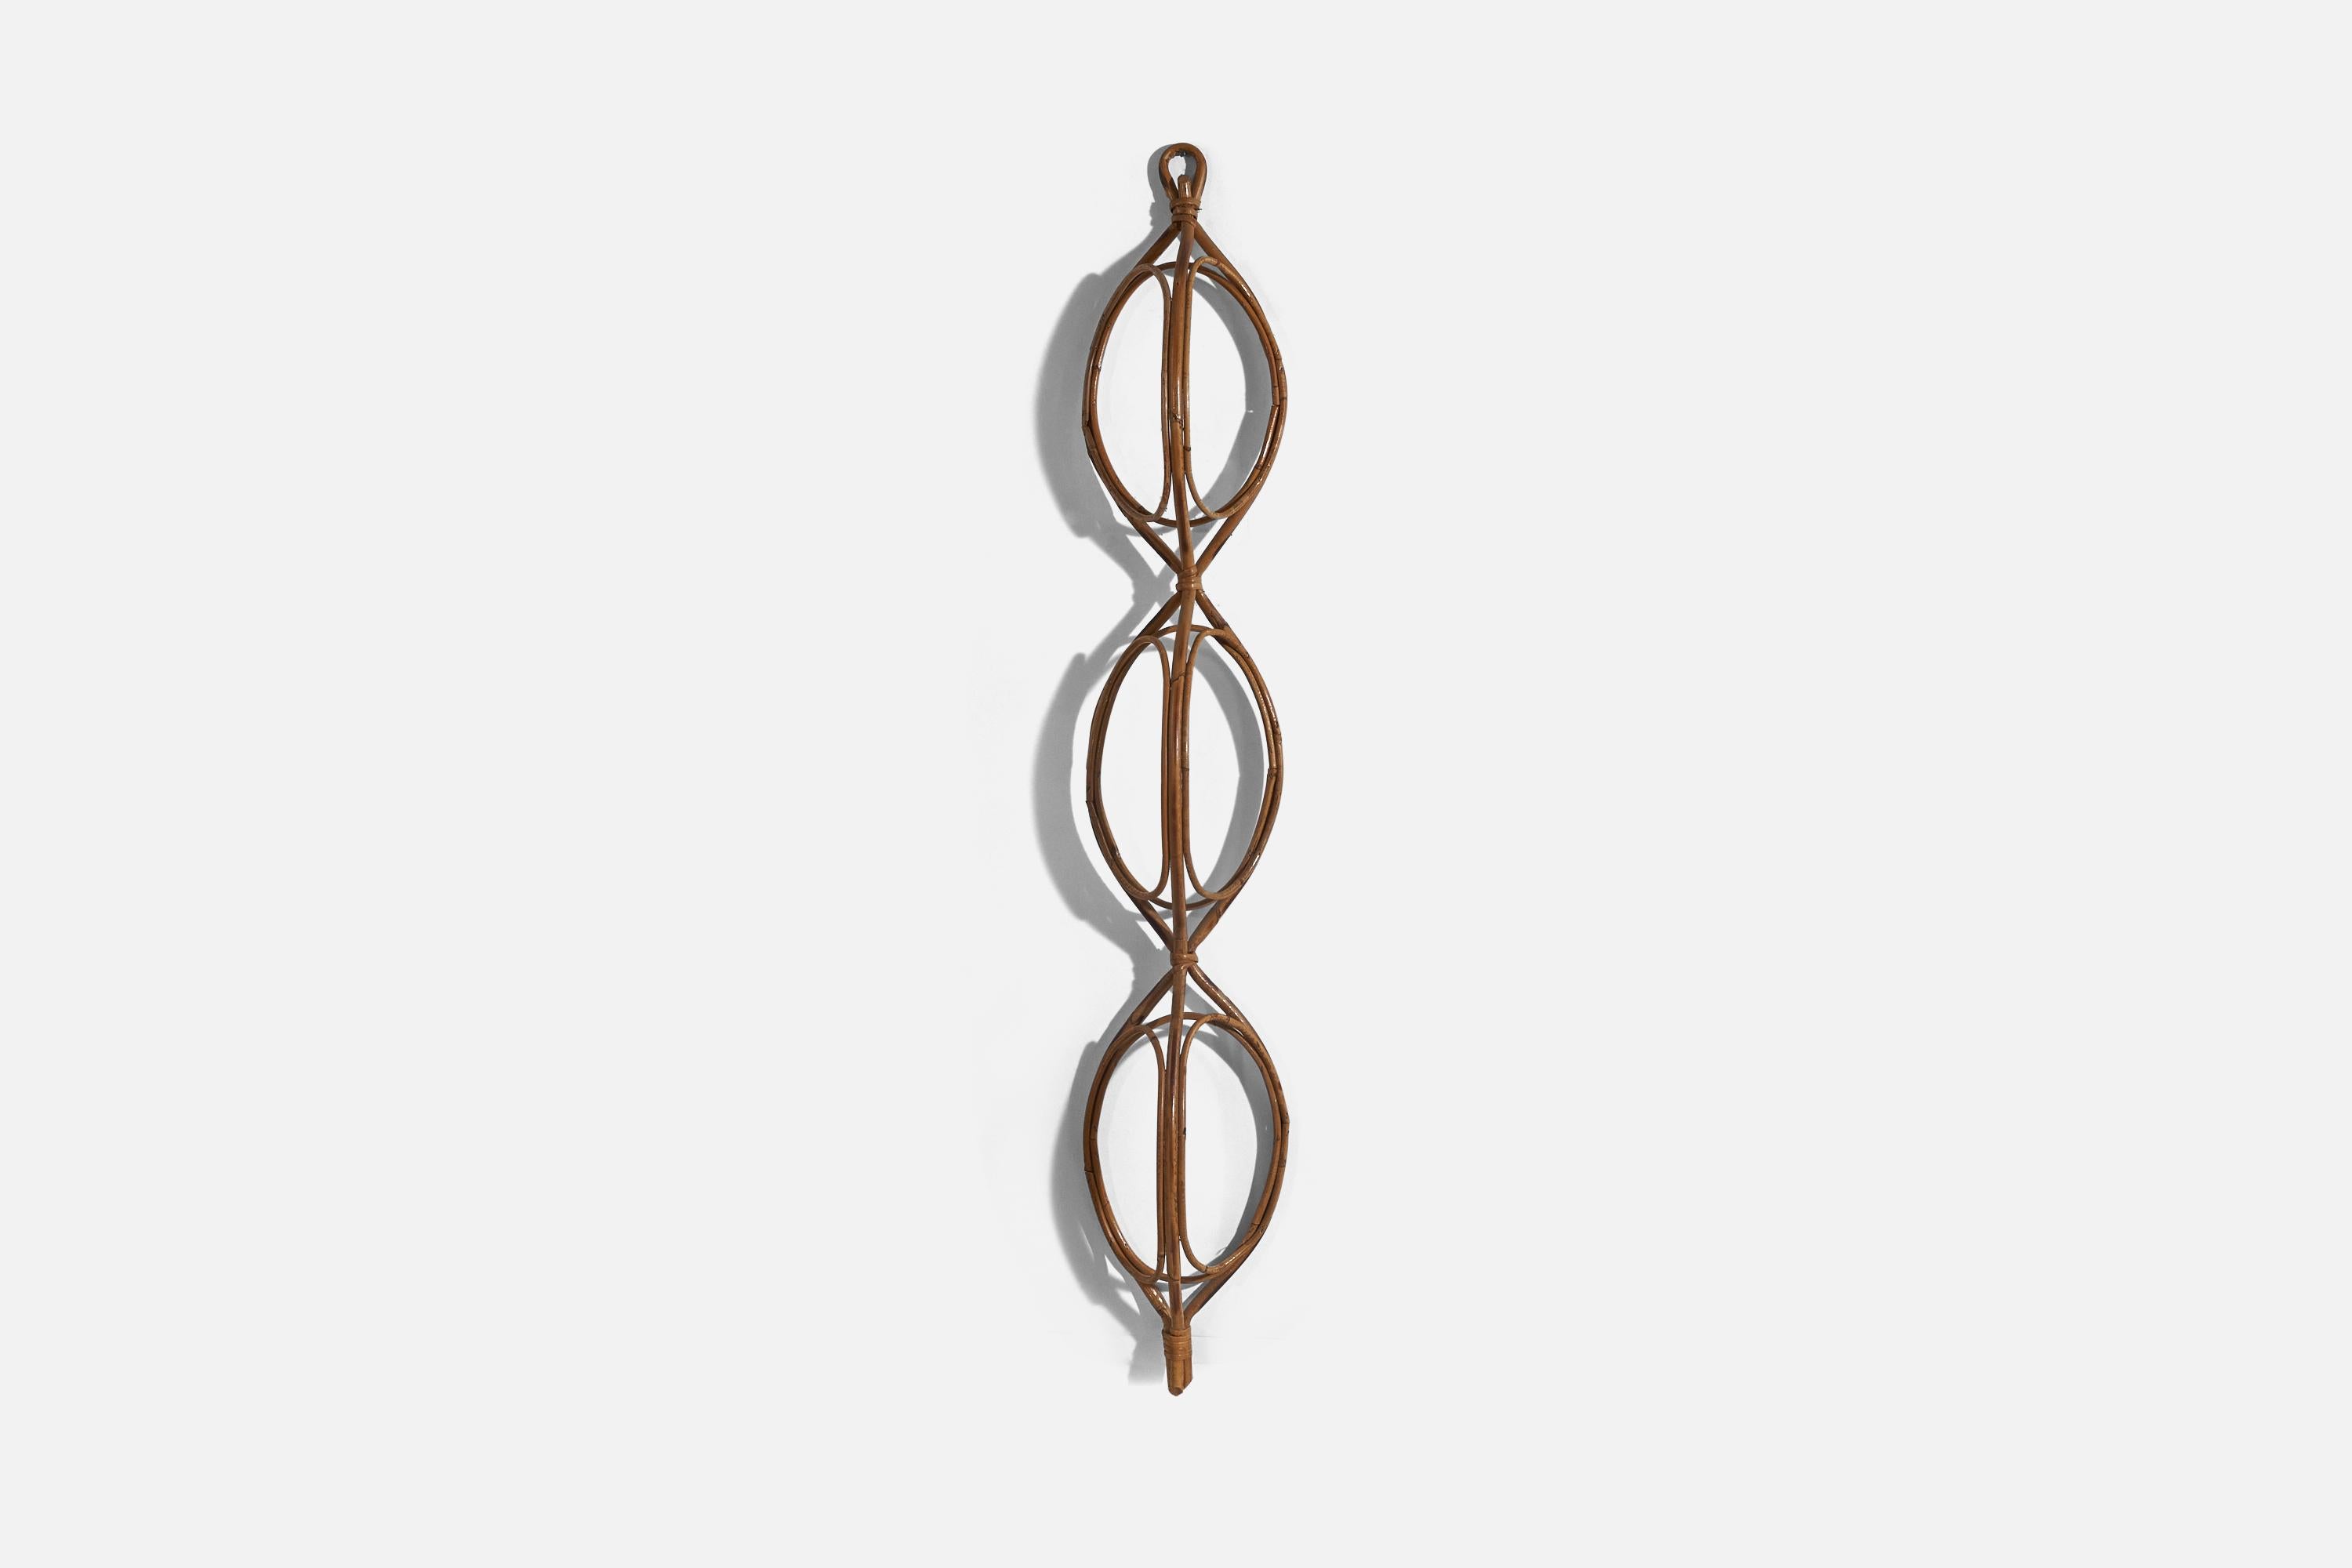 A bamboo and rattan coat rack design attributed to Franco Albini, Italy, 1950s.

